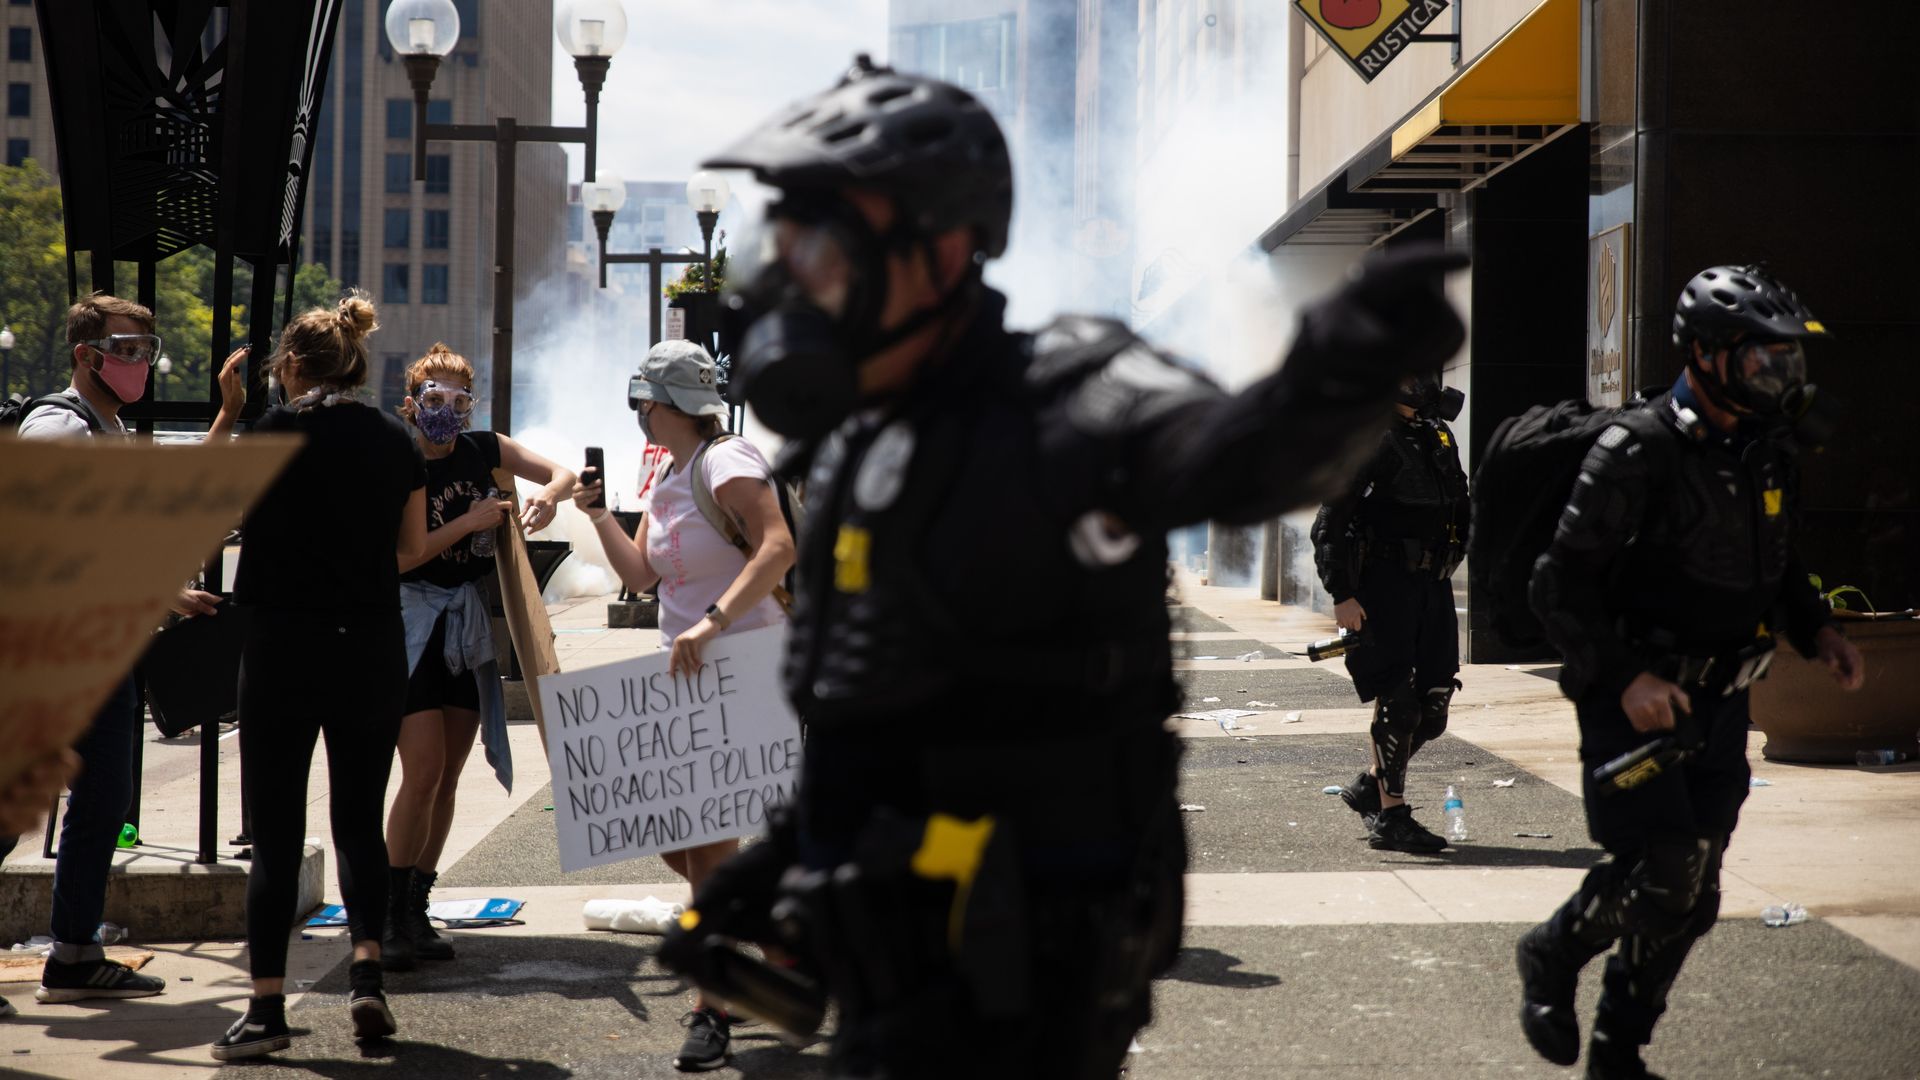 Police and protesters are seen amid a cloud of tear gas during a 2020 protest in Columbus.